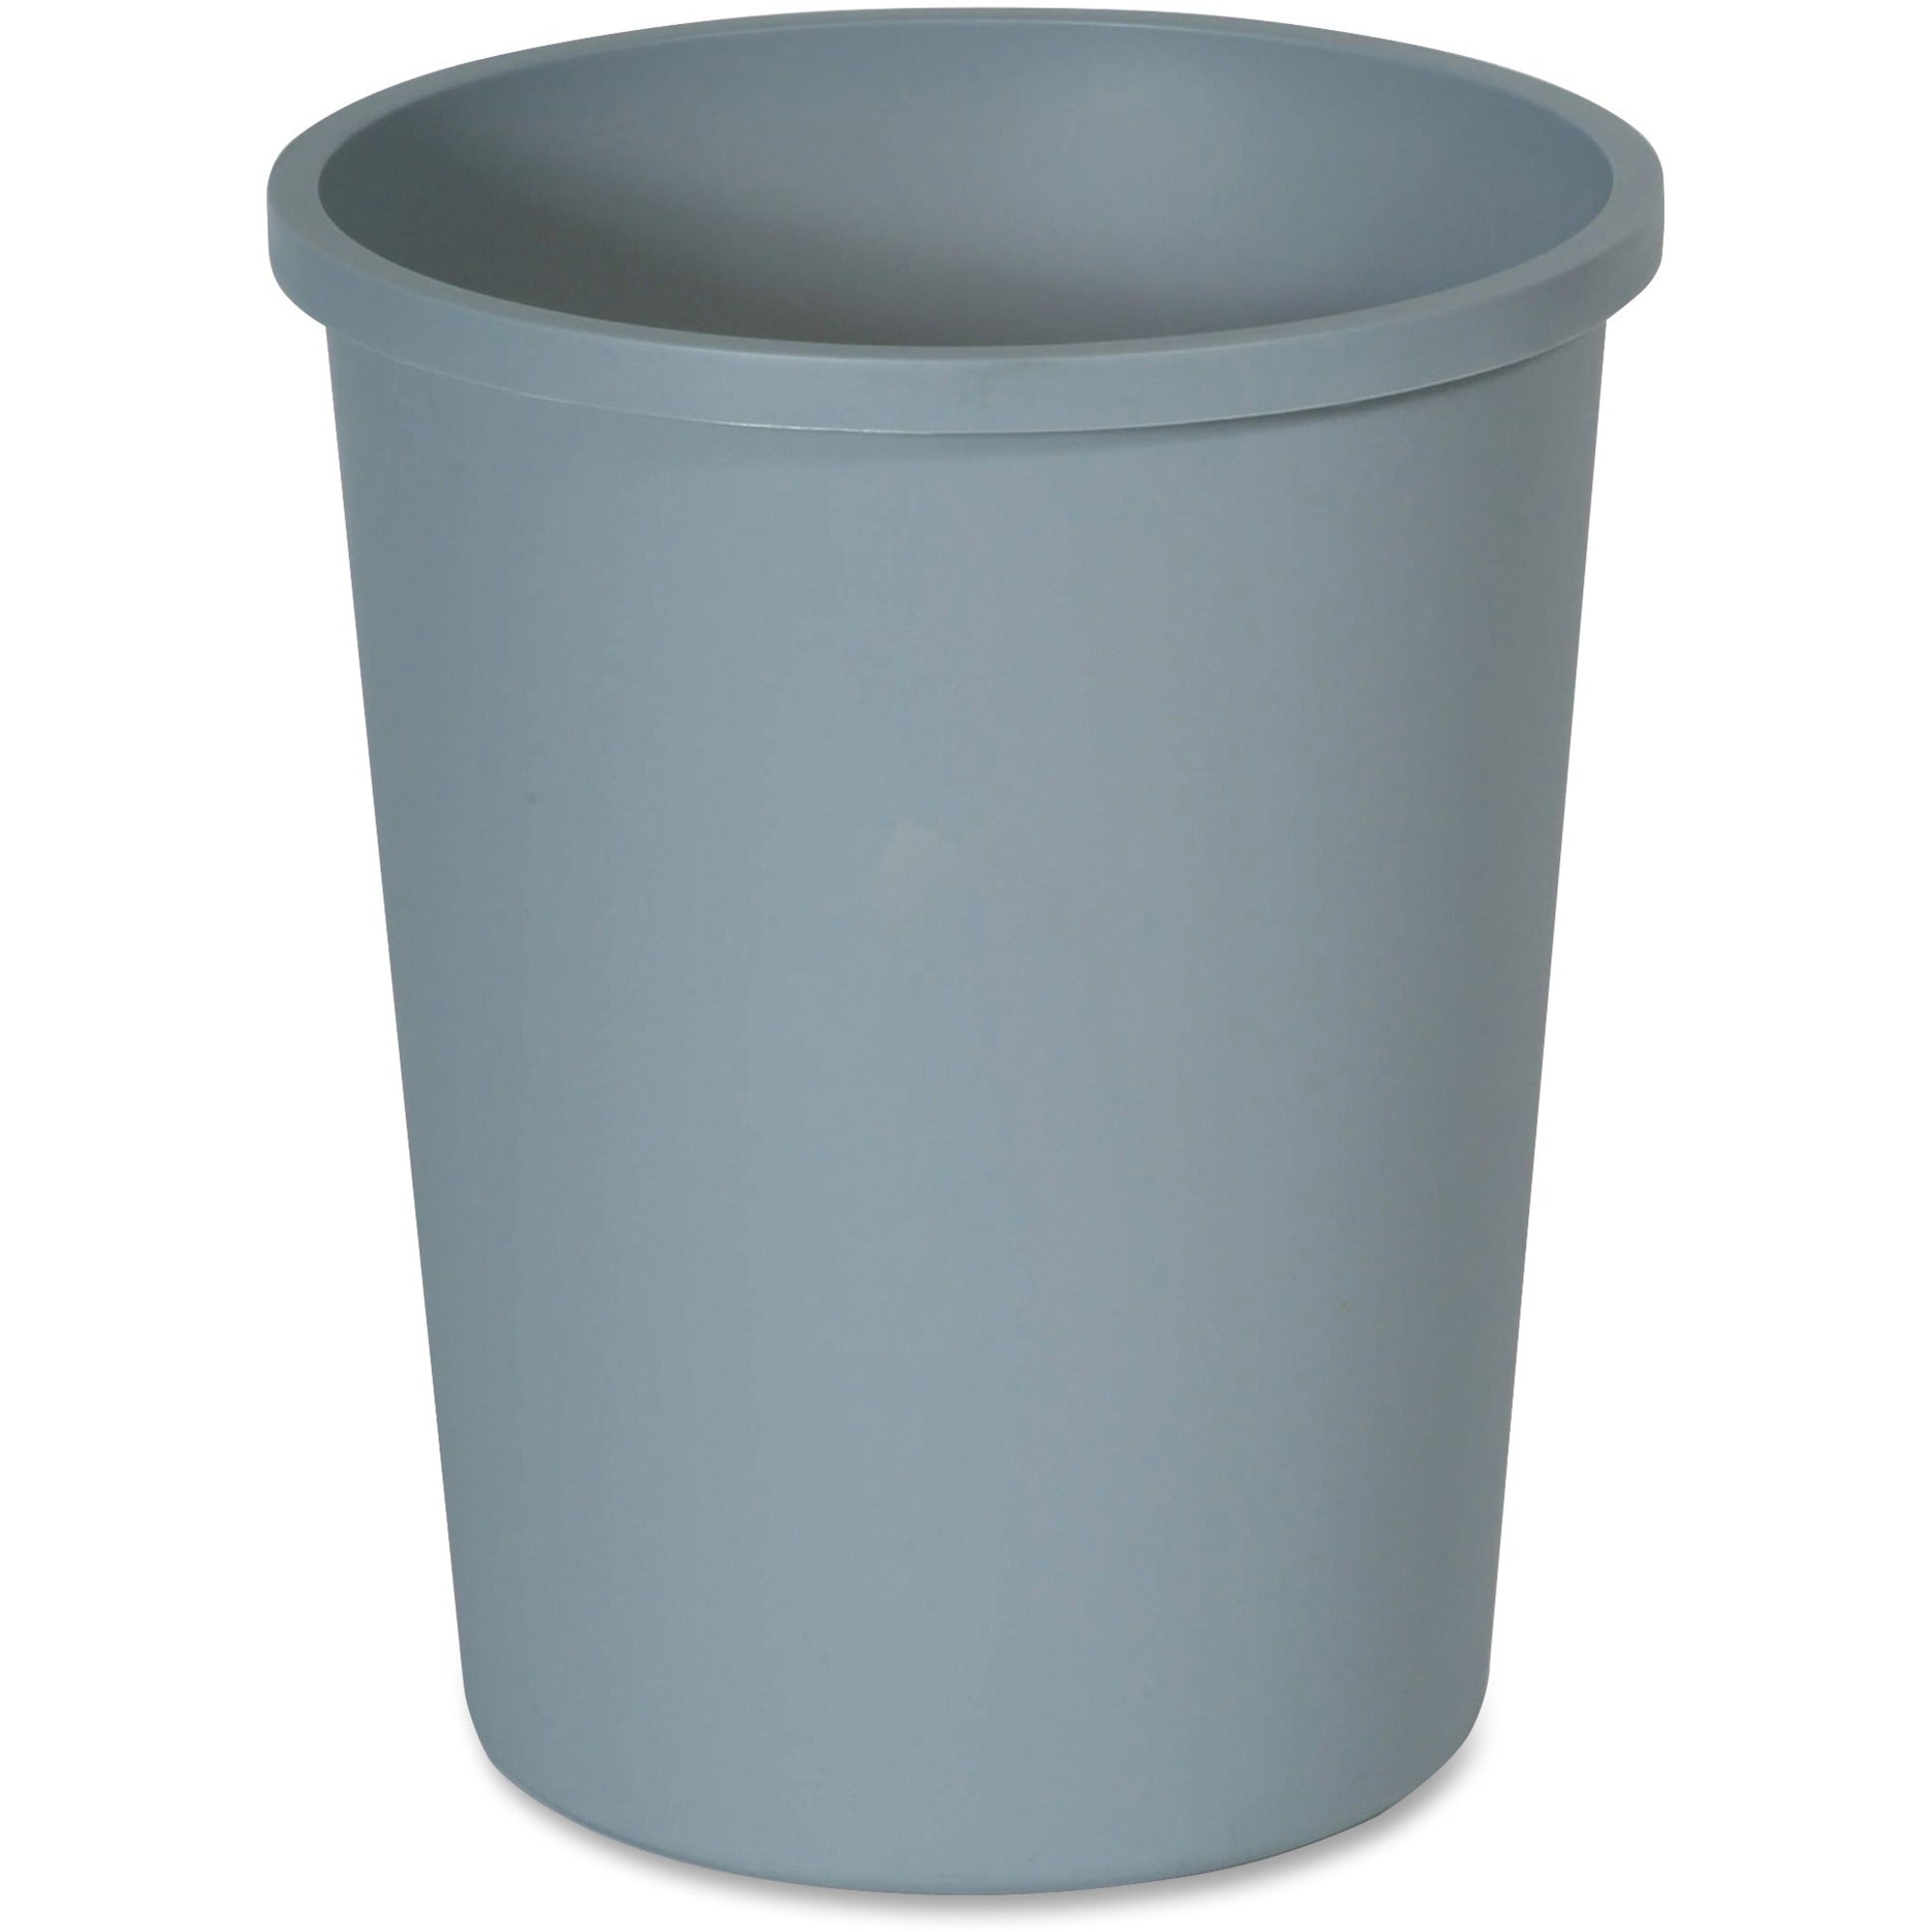 rubbermaid-commercial-untouchable-11-gallon-waste-containers-11-gal-capacity-round-crack-resistant-durable-188-height-x-158-diameter-plastic-gray-6-carton_rcp2947gract - 1